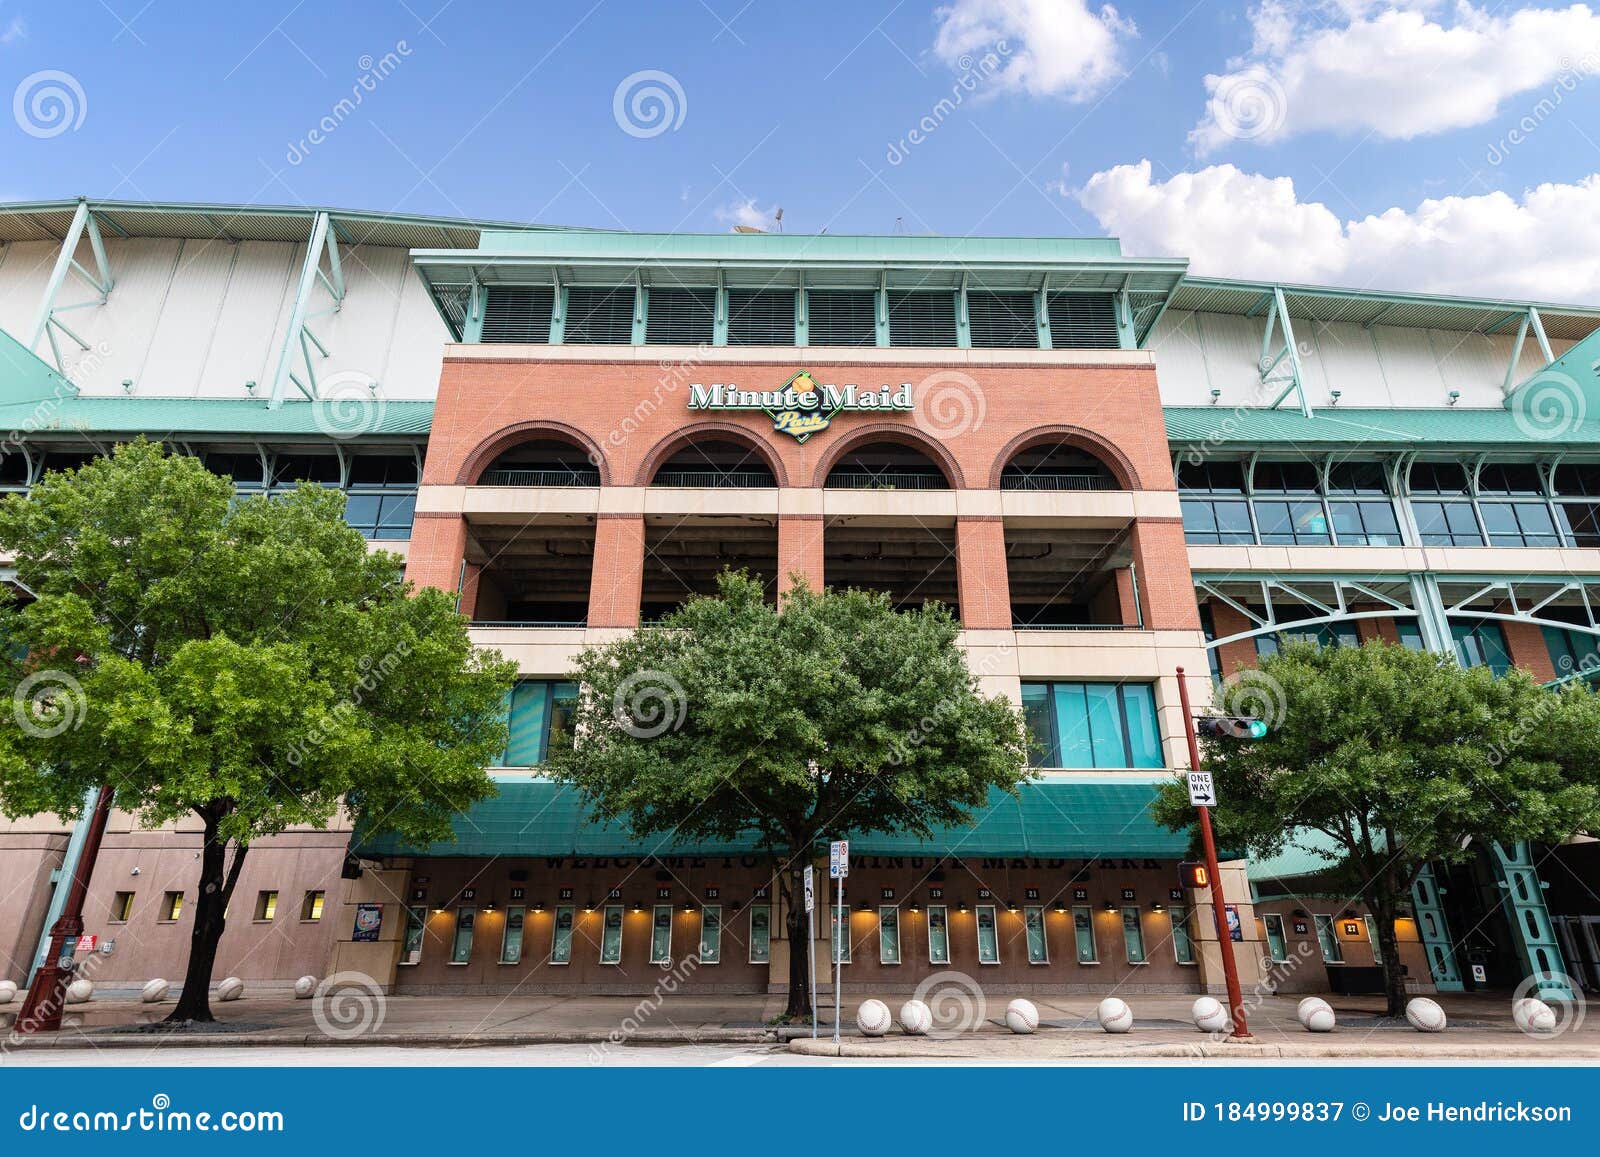 The Front of Minute Maid Stadium with Box Office Editorial Photography -  Image of arena, entrance: 184999837